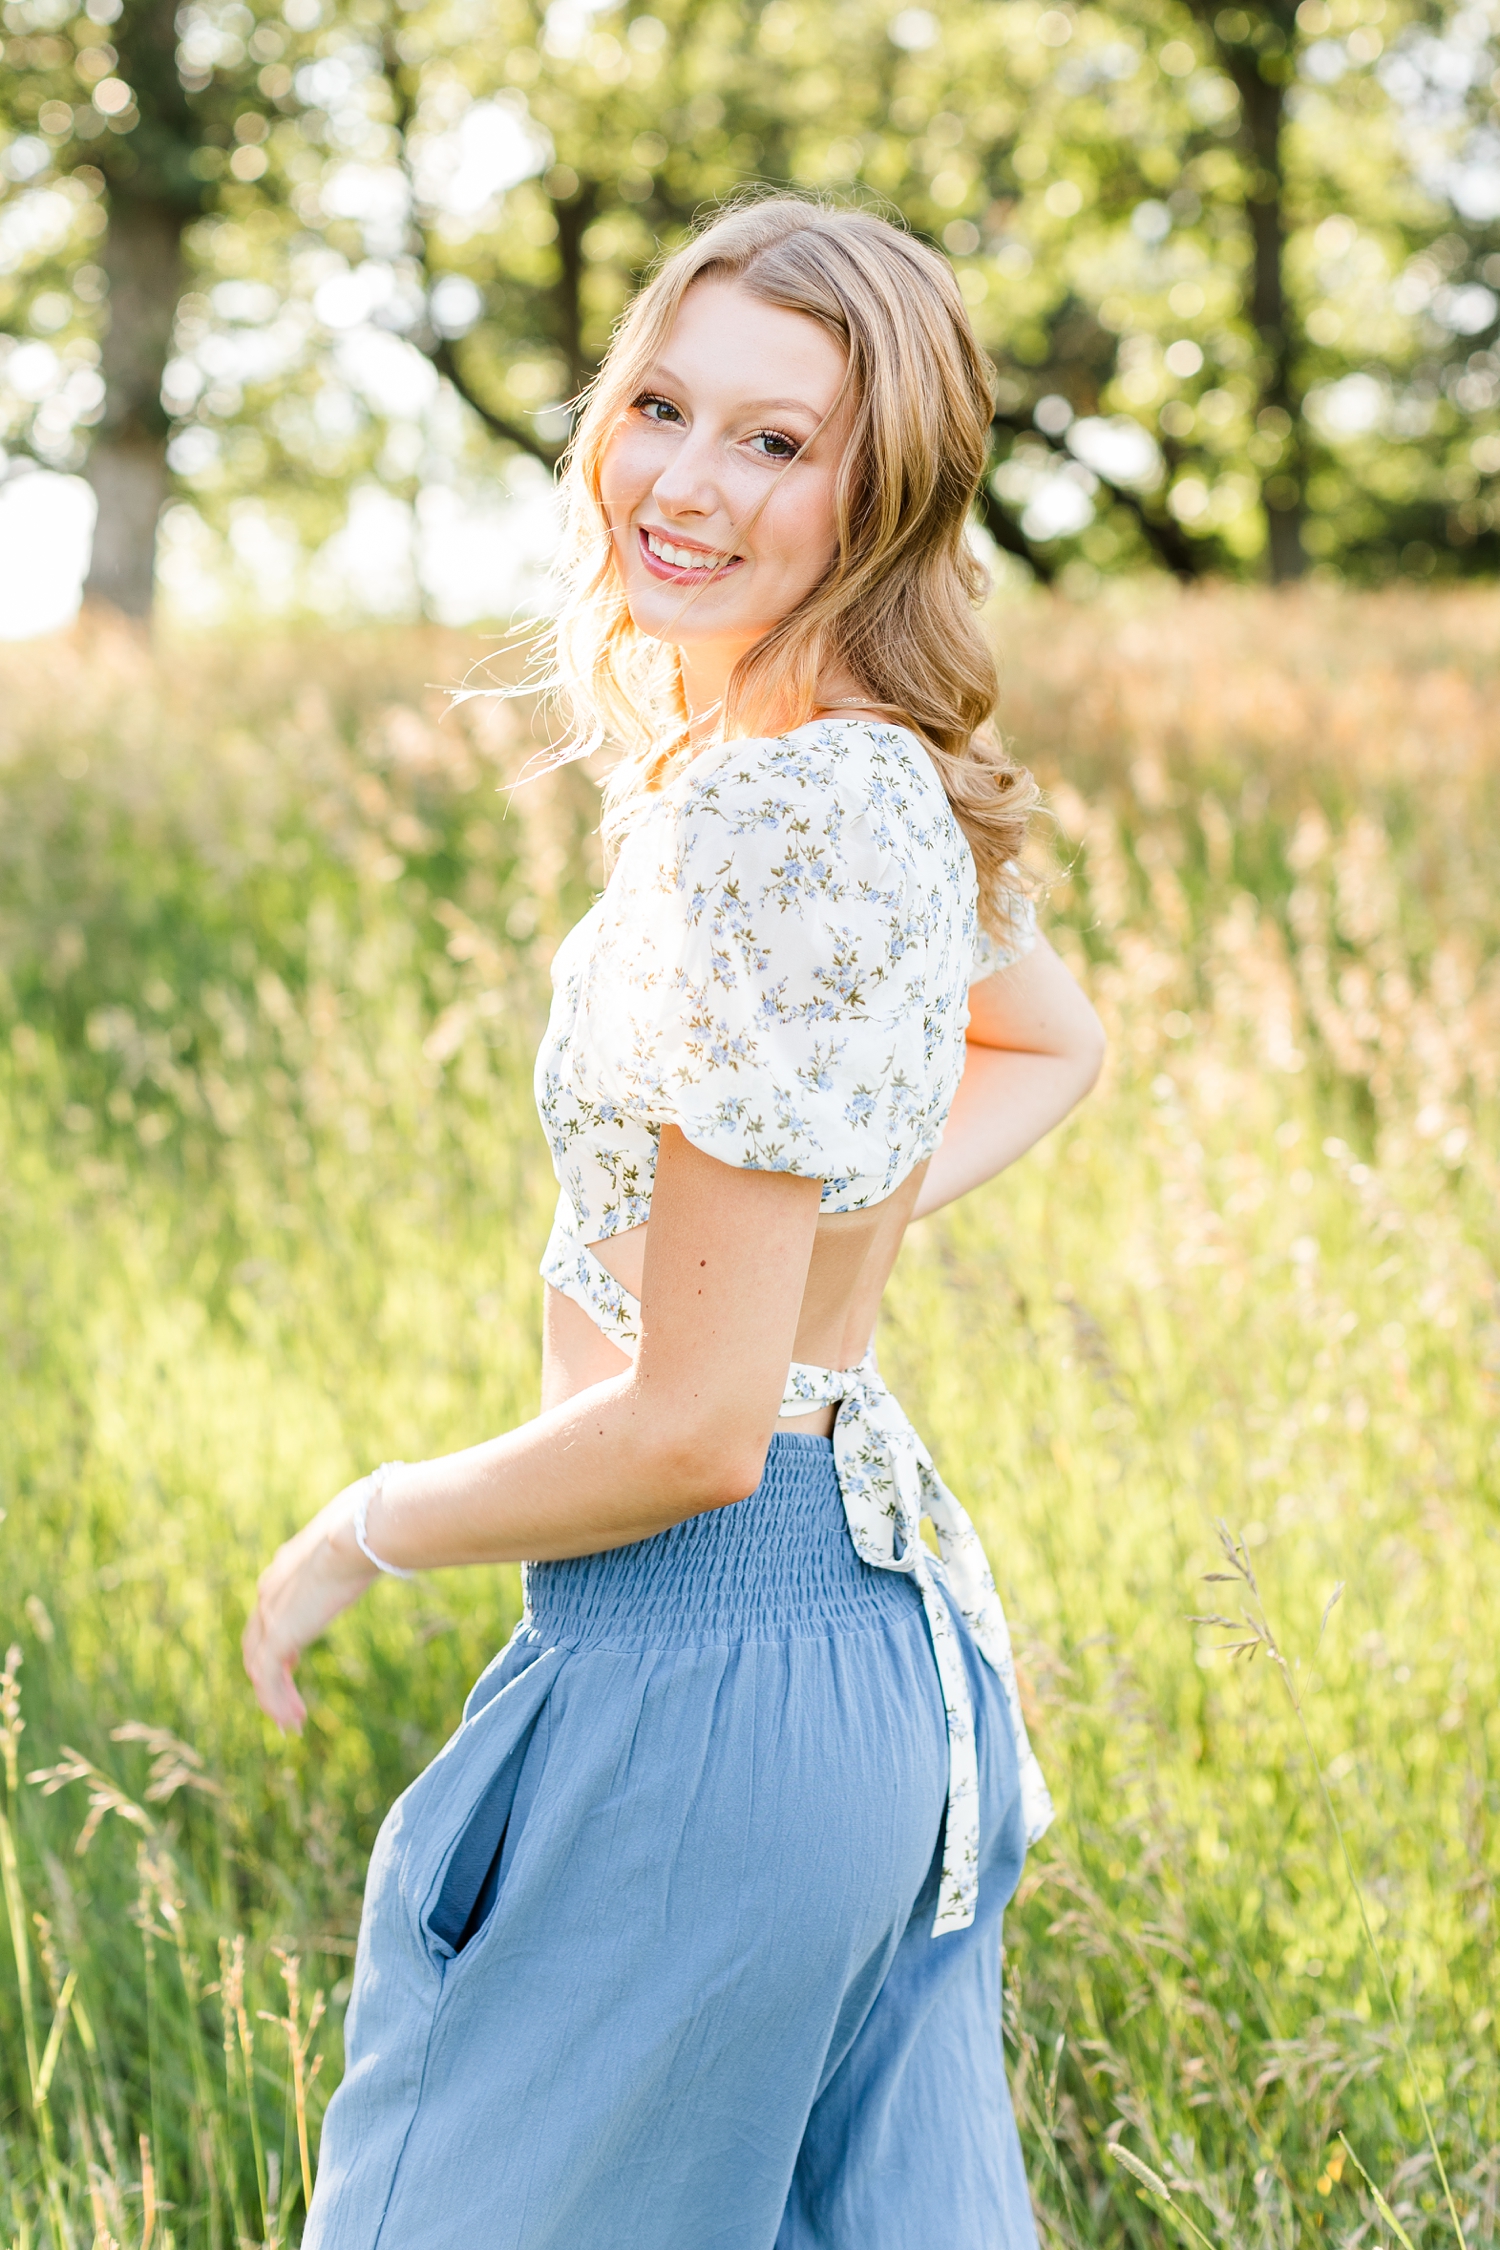 Ryley walks away in a grassy field as she looks back and smiles | CB Studio